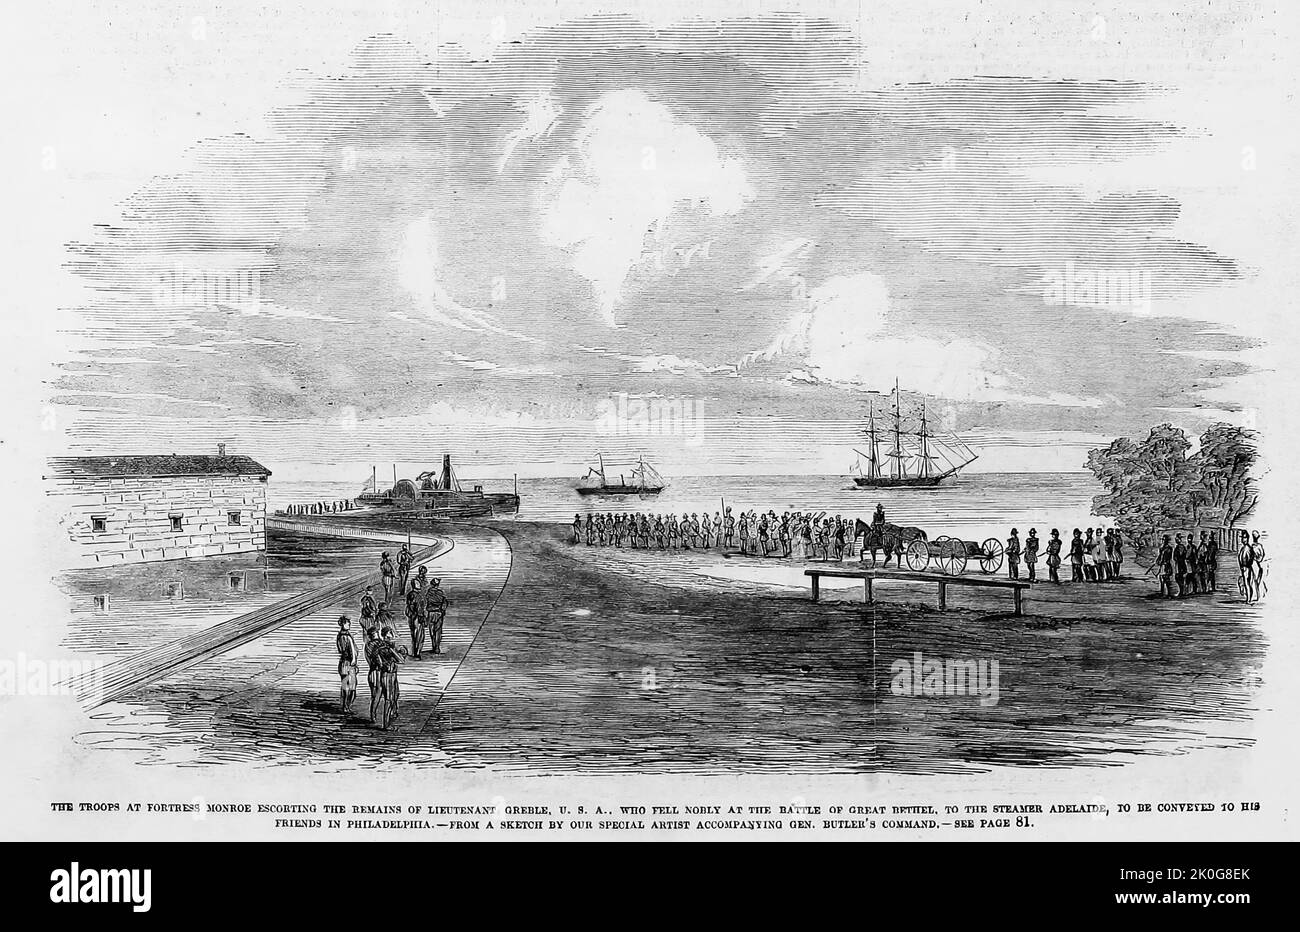 The troops at Fort Monroe, Virginia, escorting the remains of Lieutenant Greble, who fell nobly at the Battle of Great Bethel, to the steamer Adelaide, to be conveyed to his friends in Philadelphia, June 1861. 19th century American Civil War illustration from Frank Leslie's Illustrated Newspaper Stock Photo